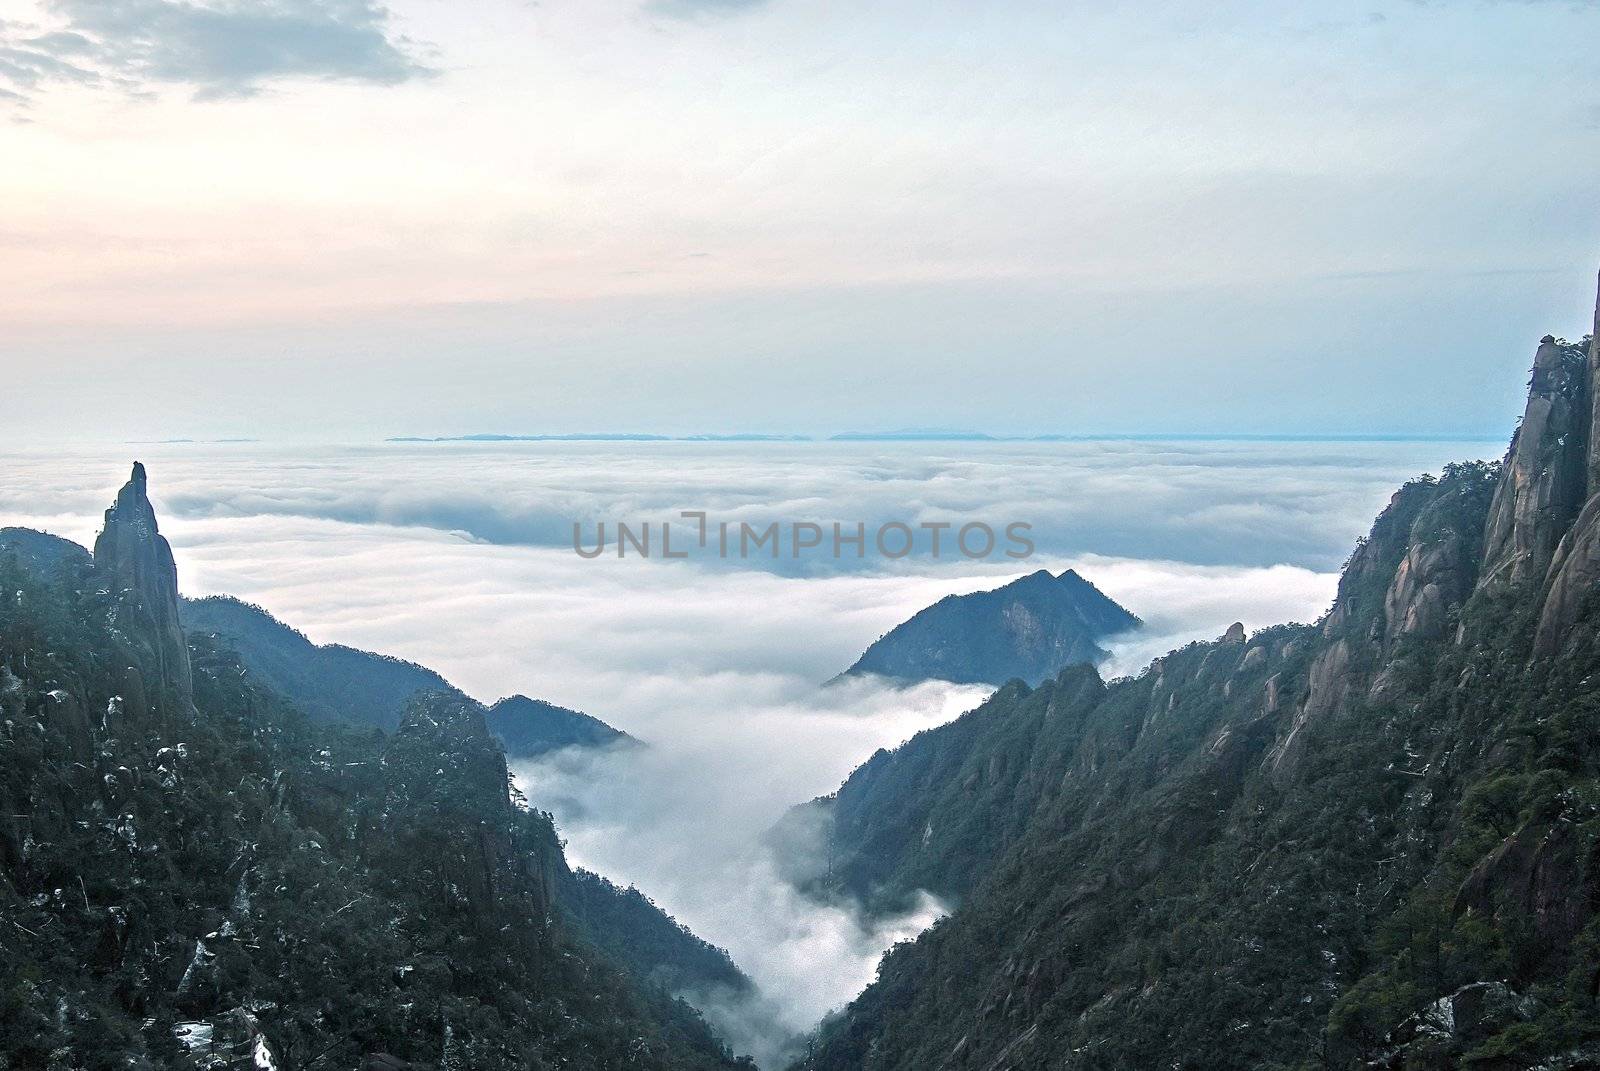 The cloud and mist of Sanqingshan mountain - Filming in Jiangxi, China by xfdly5